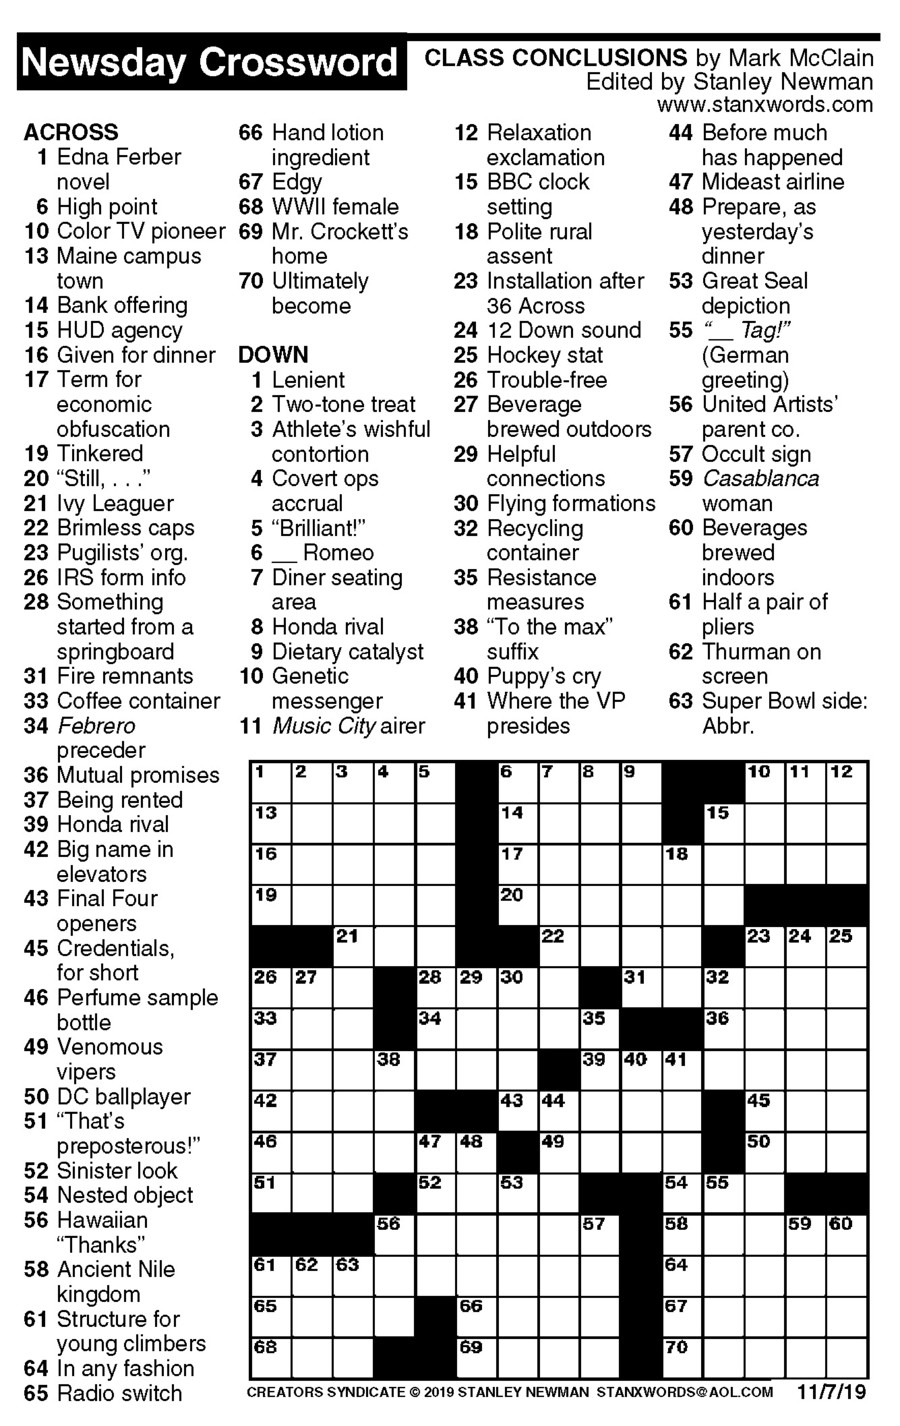 Archive Of Printable Newsday Crossword Puzzles